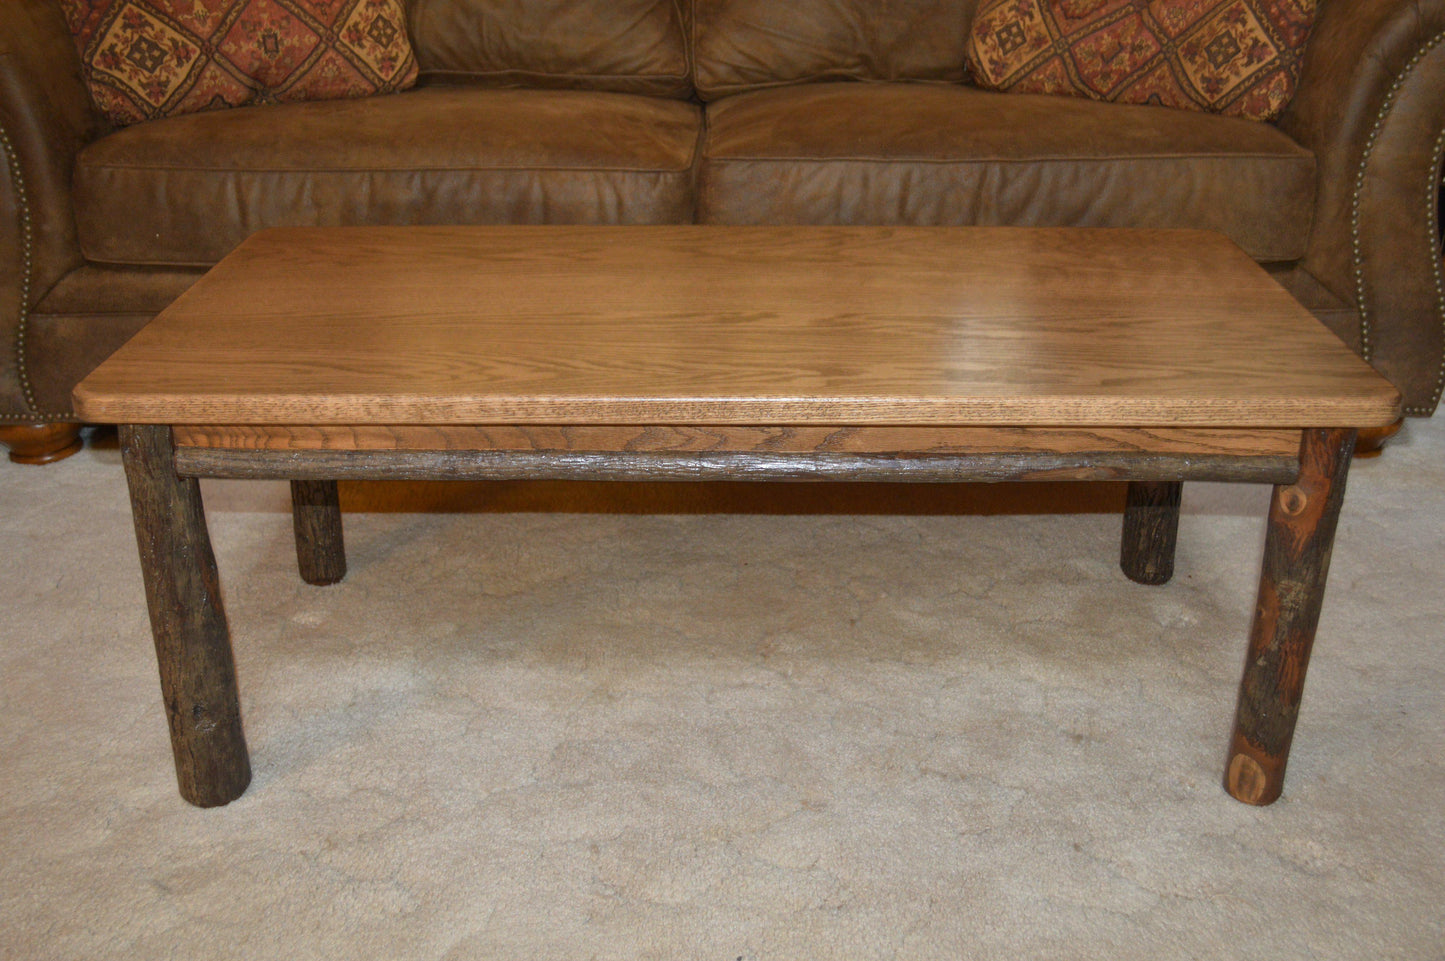 A&L Furniture Co. Amish Hickory Solid Wood Coffee Table - LEAD TIME TO SHIP 10 BUSINESS DAYS